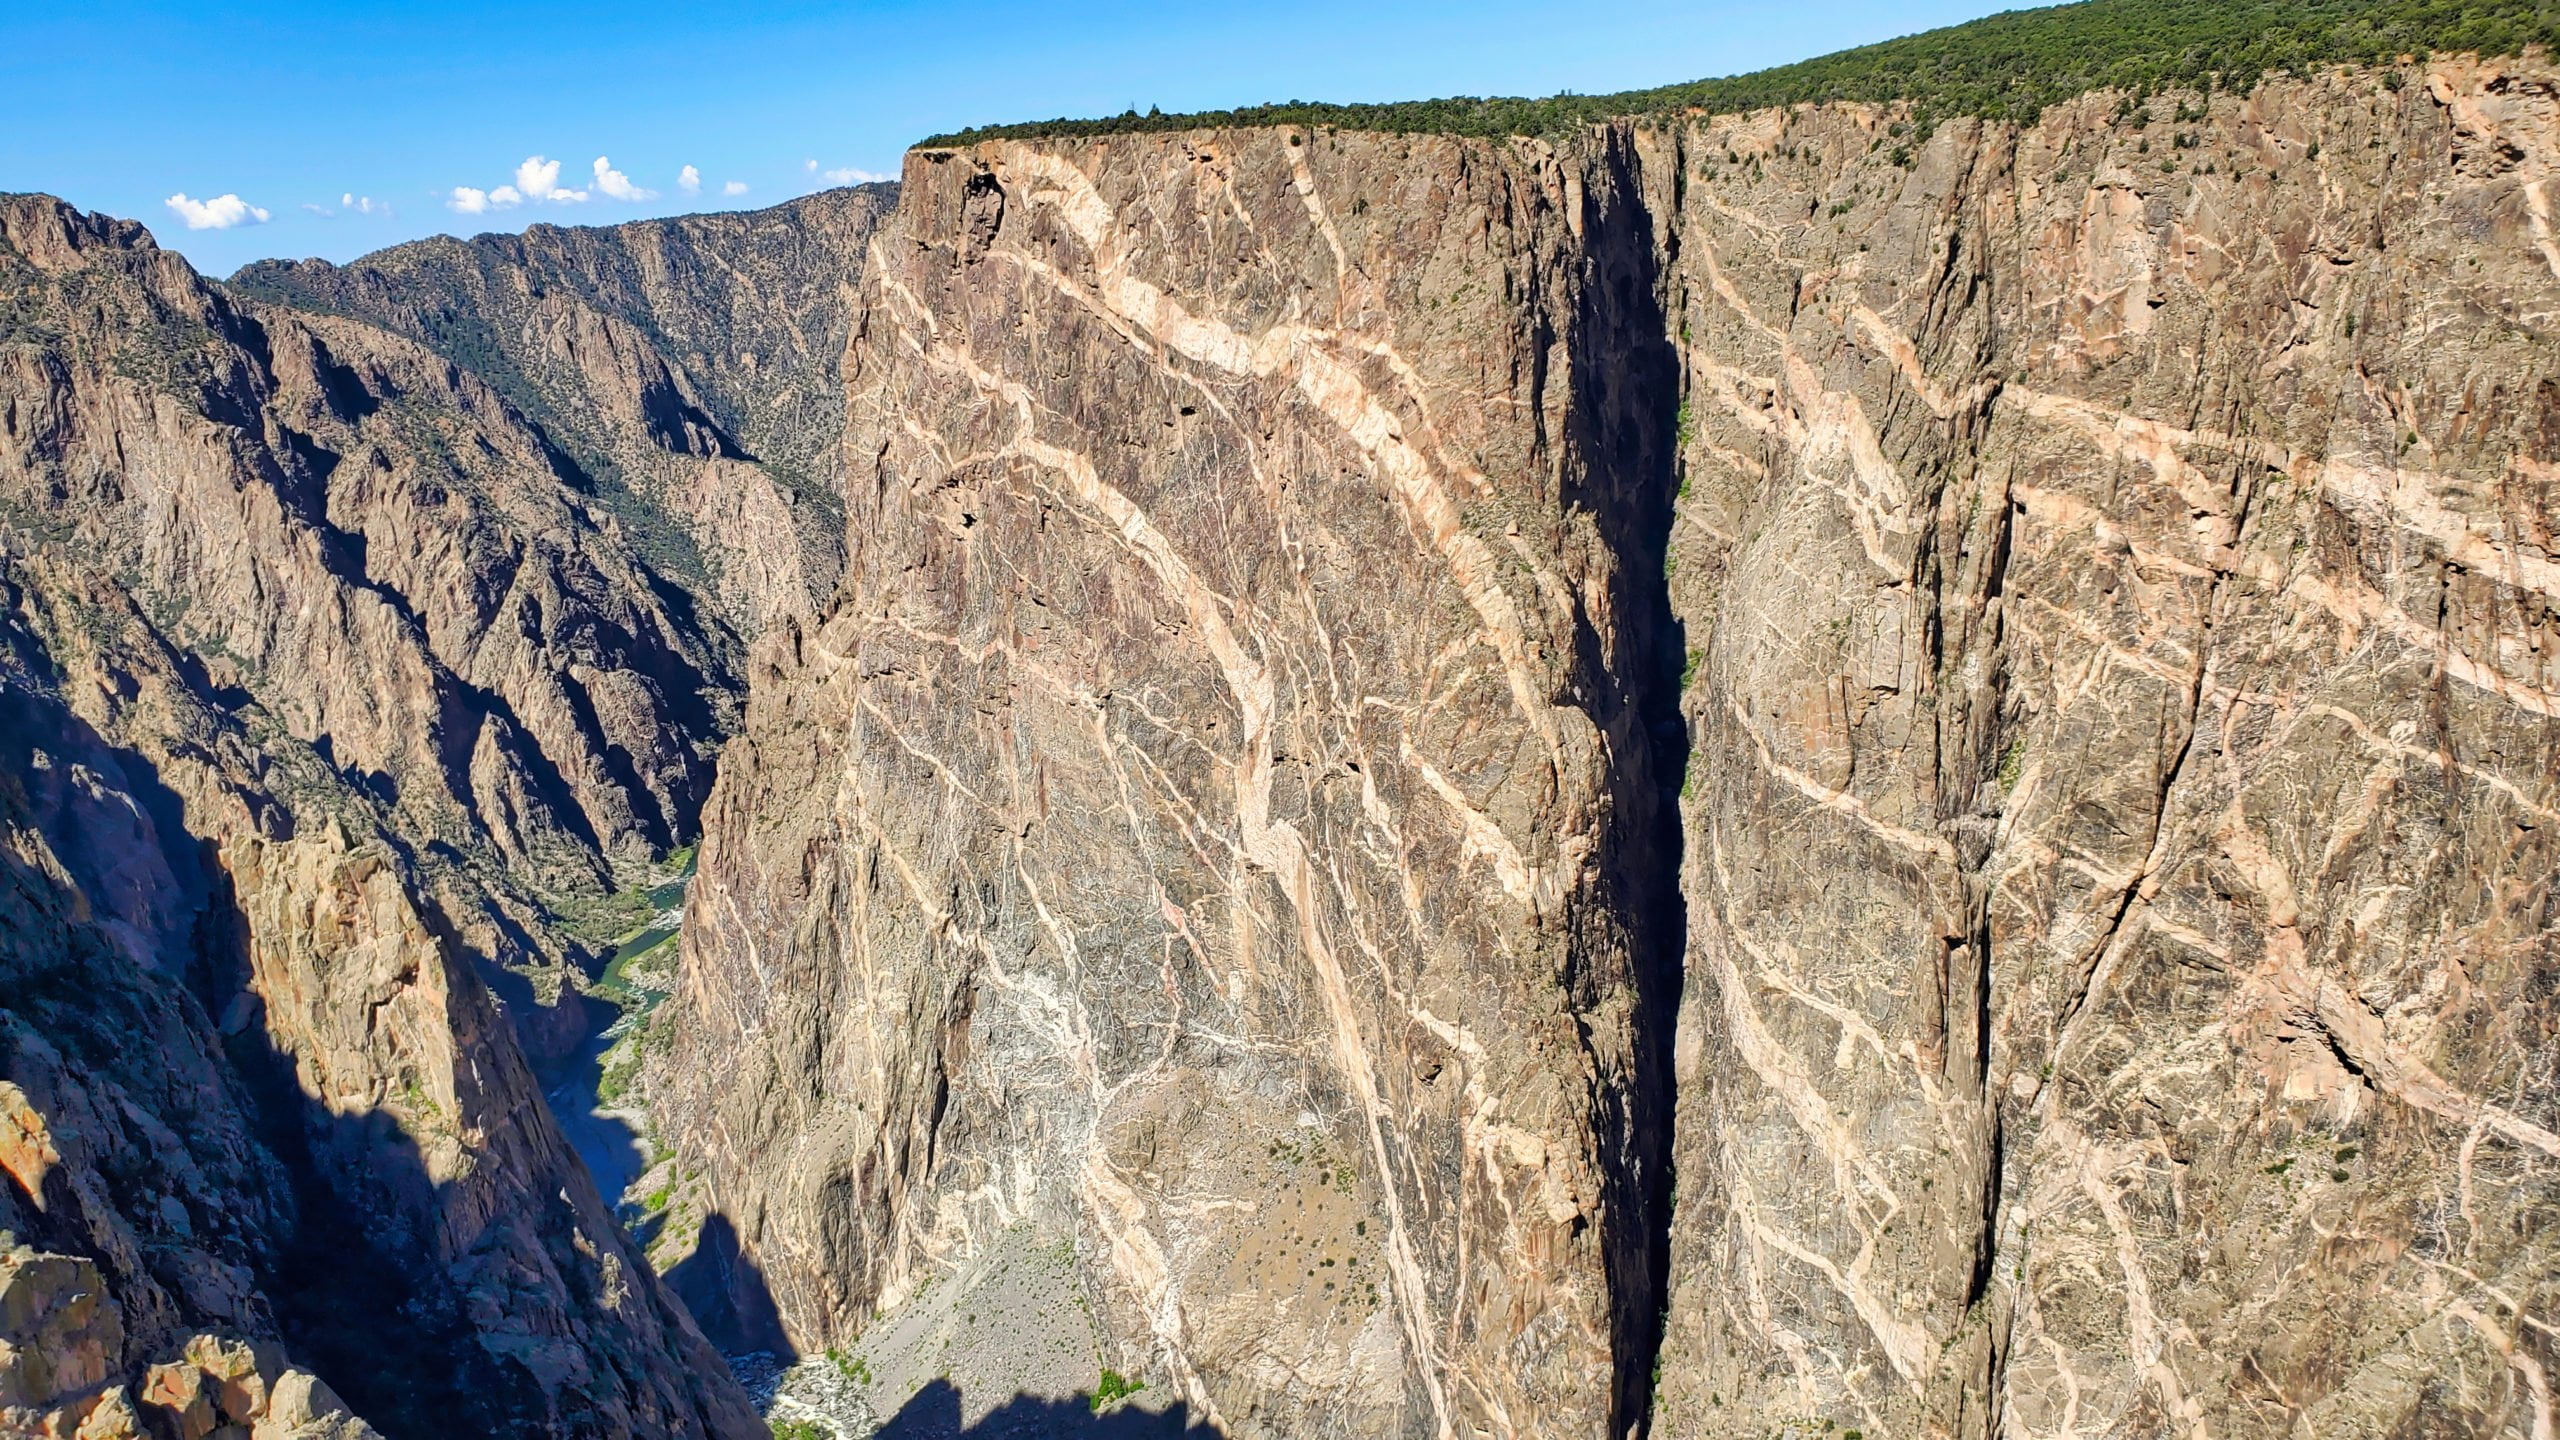 Painted Wall, Black Canyon of the Gunnison